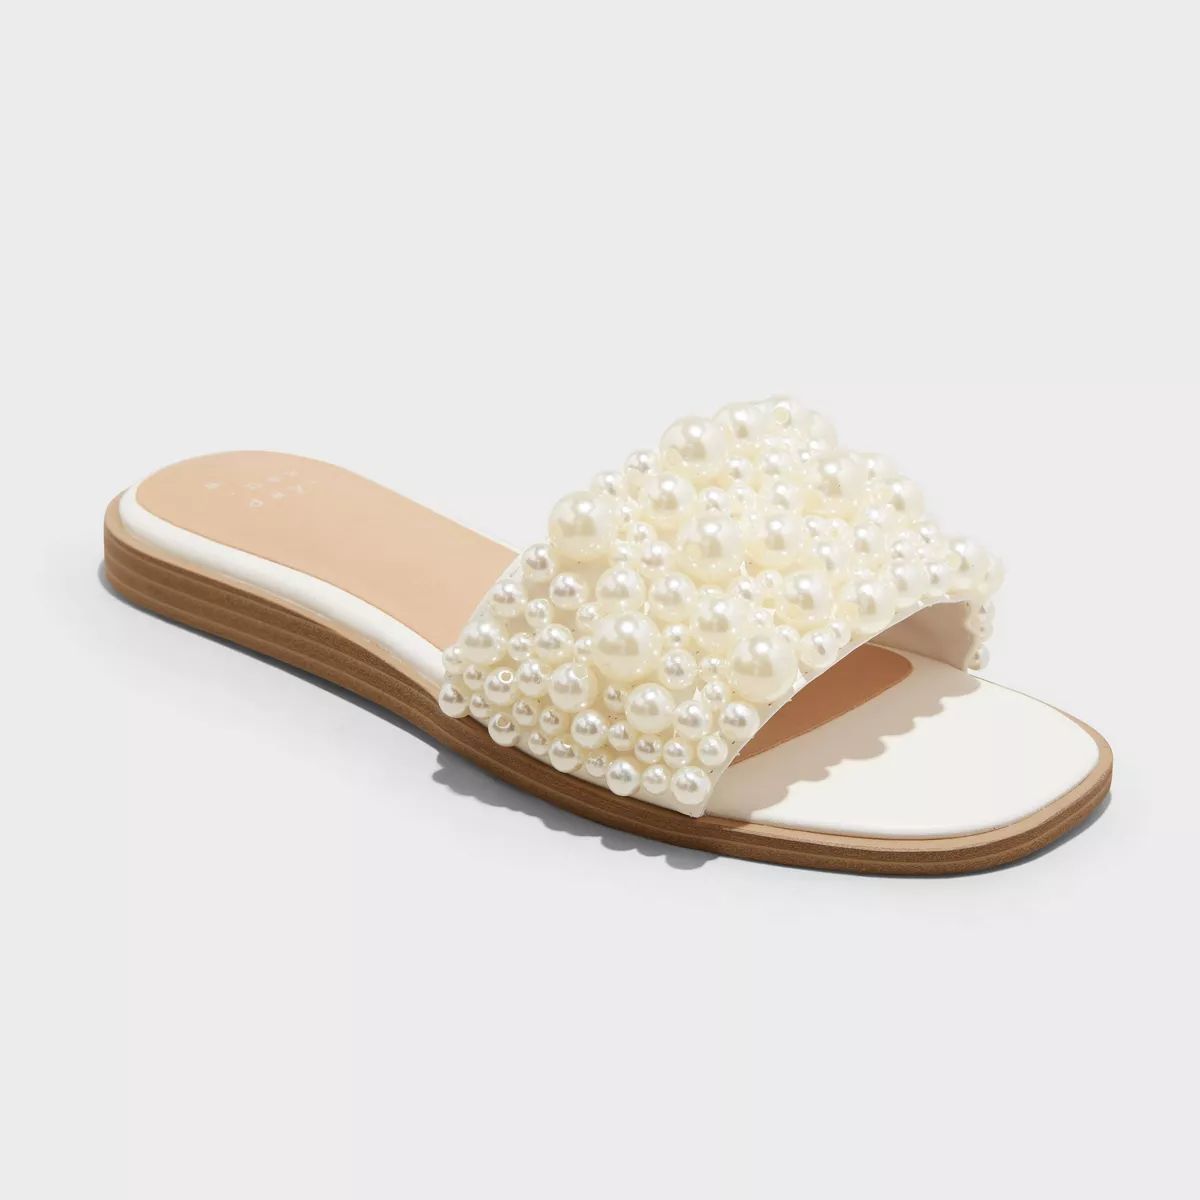 Women's Jasmine Pearl Slide Sandals with Memory Foam Insole - A New Day™ Cream 8 | Target